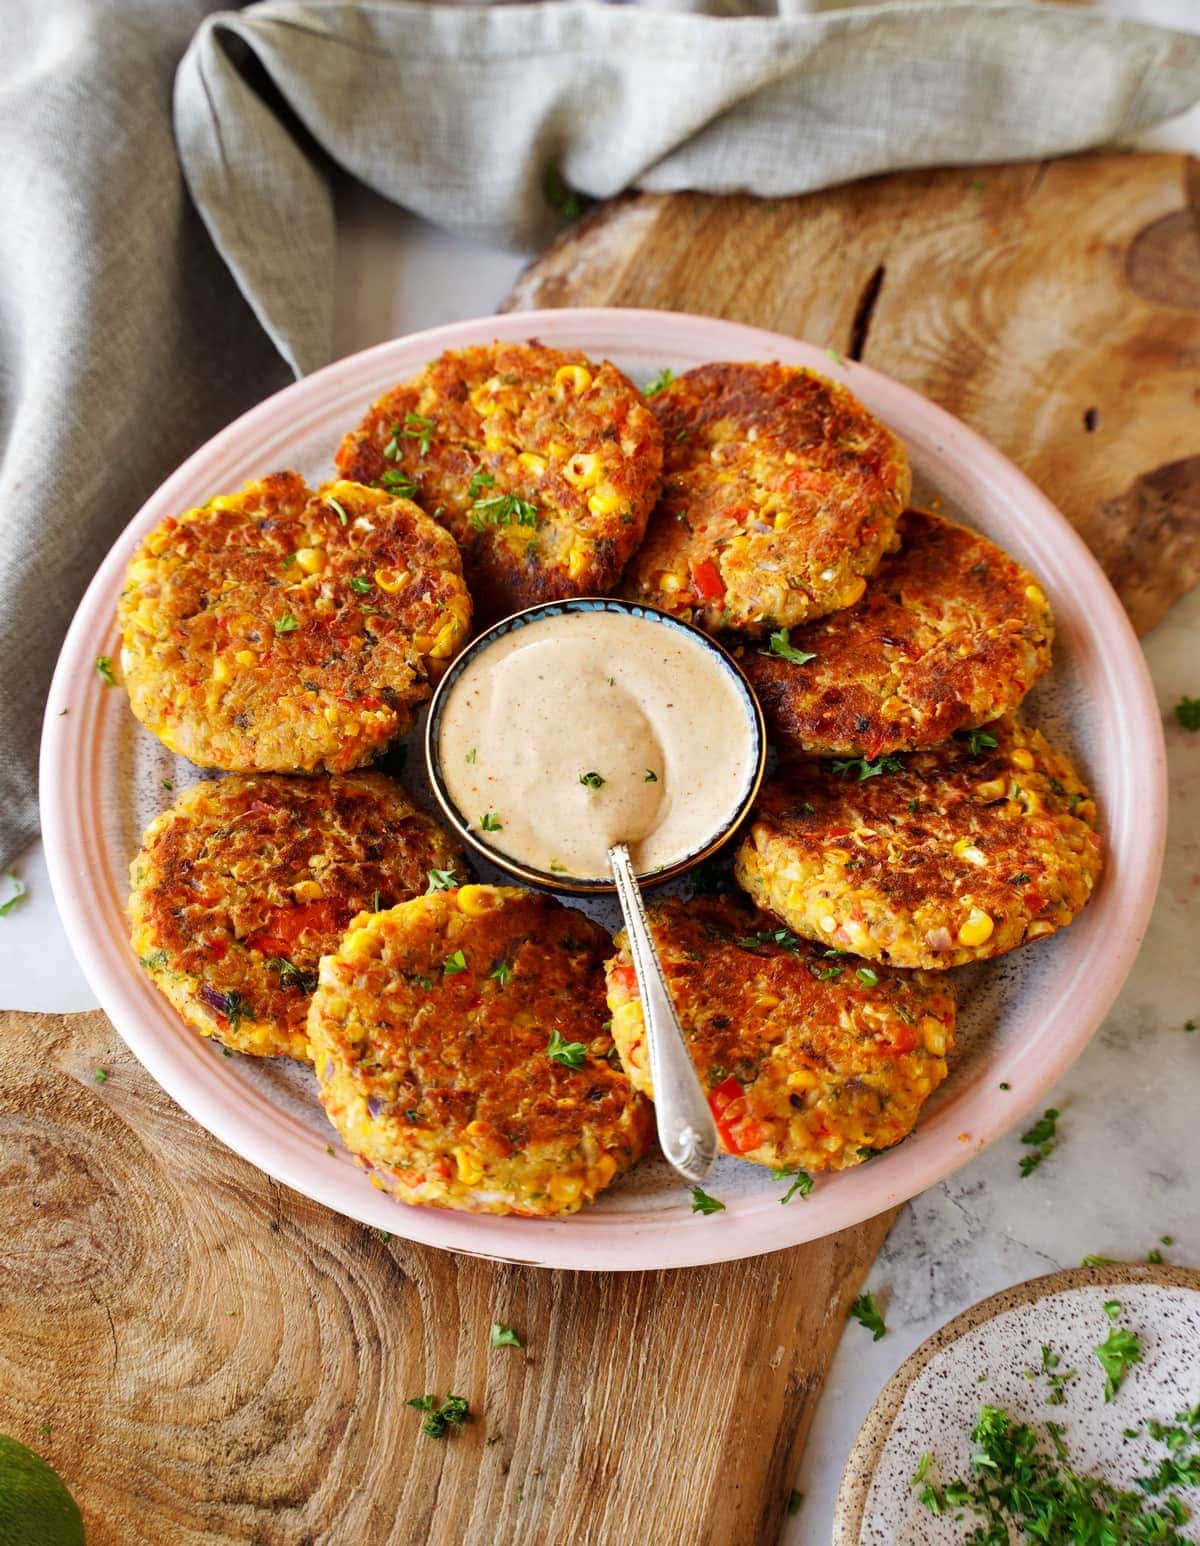 8 vegetable burgers on plate with white dip